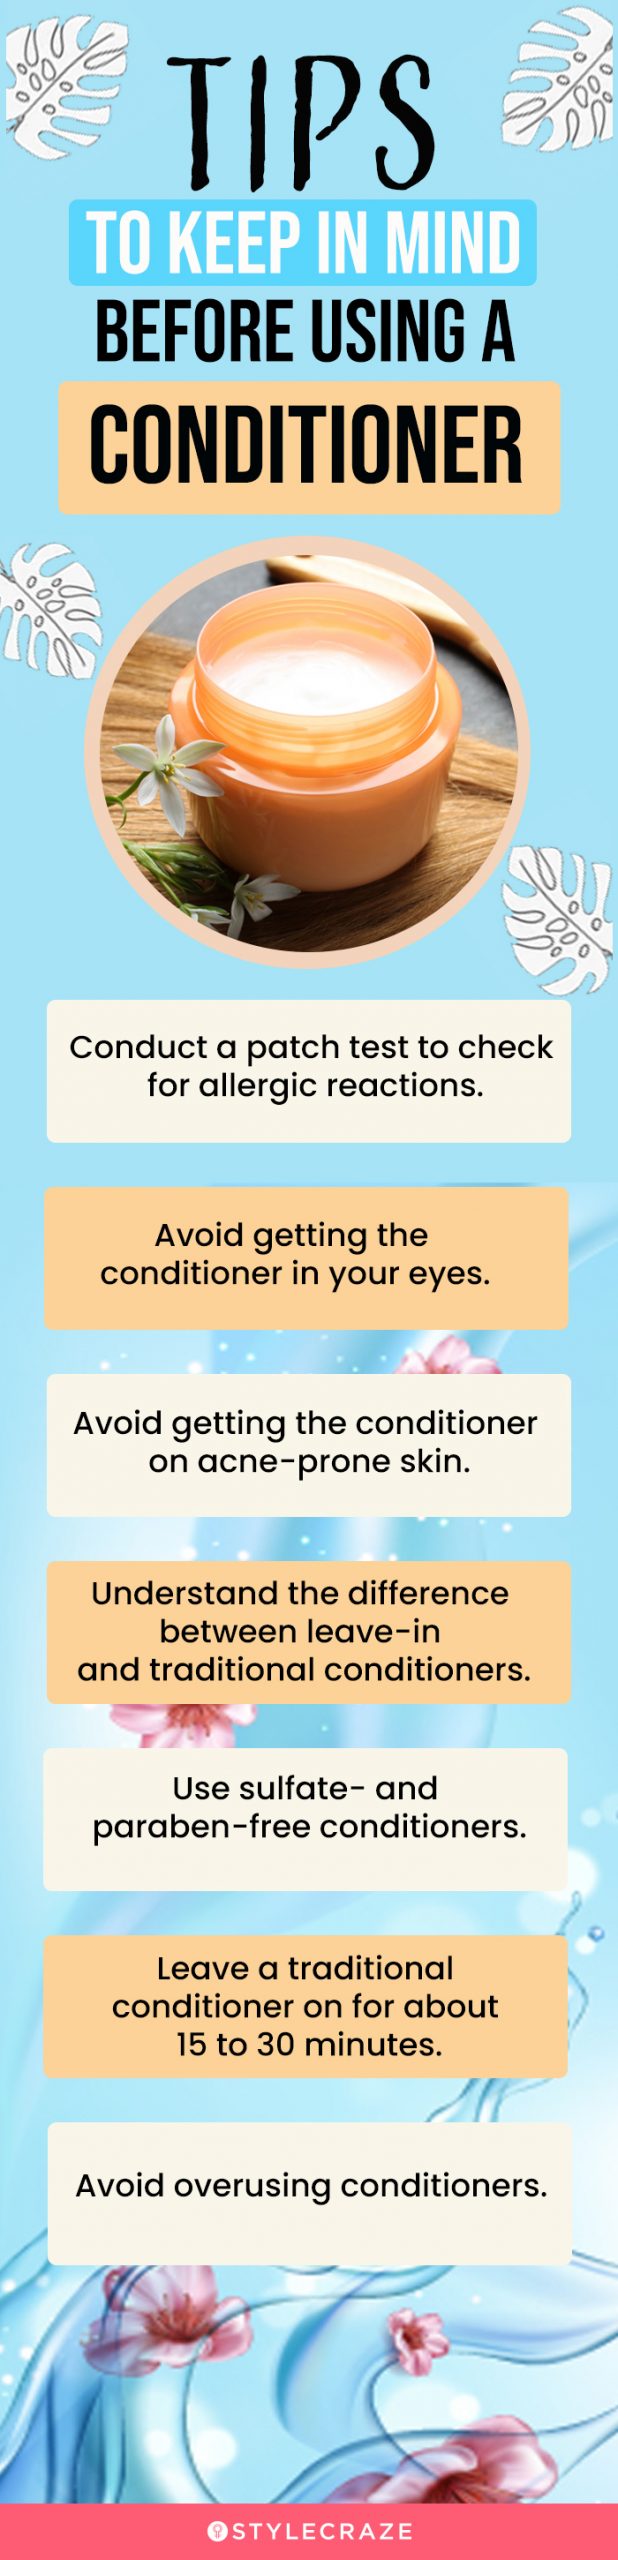 tips to keep in mind before using a conditioner [infographic]